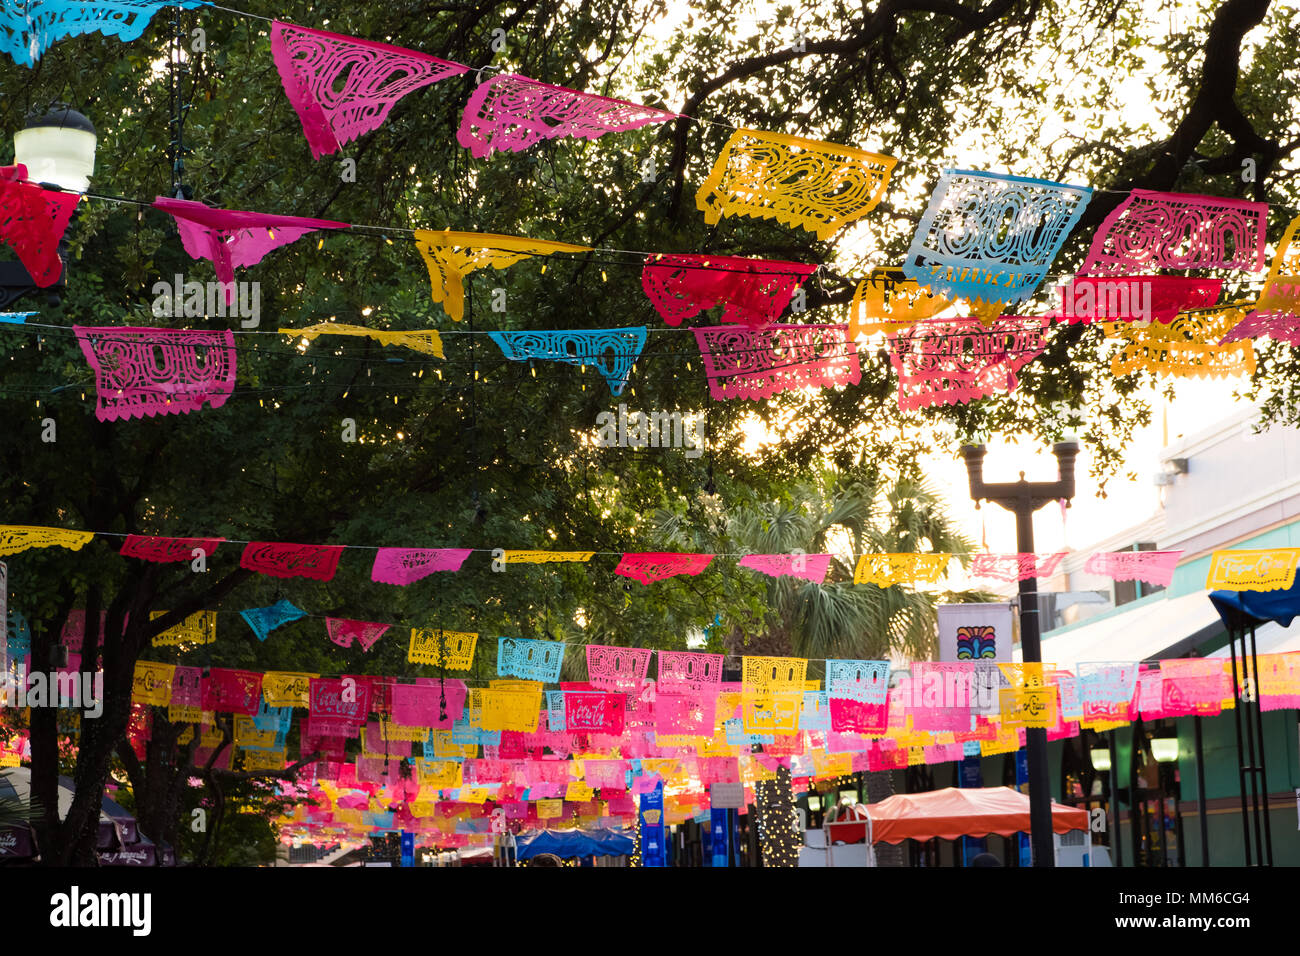 San Antonio, Texas - April 18, 2018: Fiesta flags are put up for the tricentennial year of the city of San Antonio, TX. Stock Photo